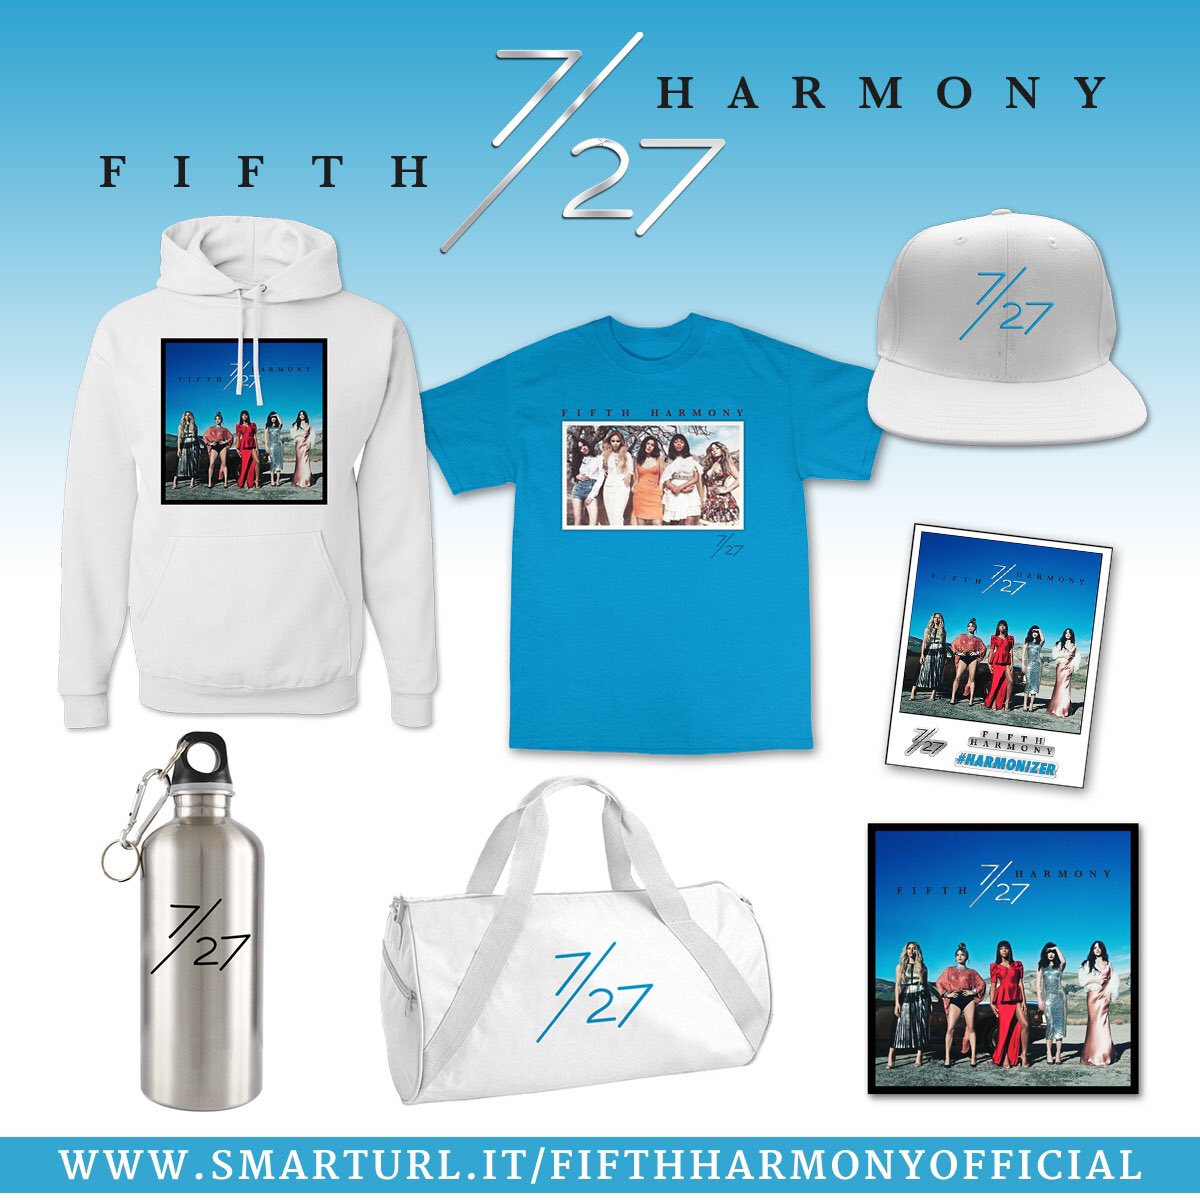 The mystery boxes have been revealed & more have been made available • Get yours at fifthharmony.co/store